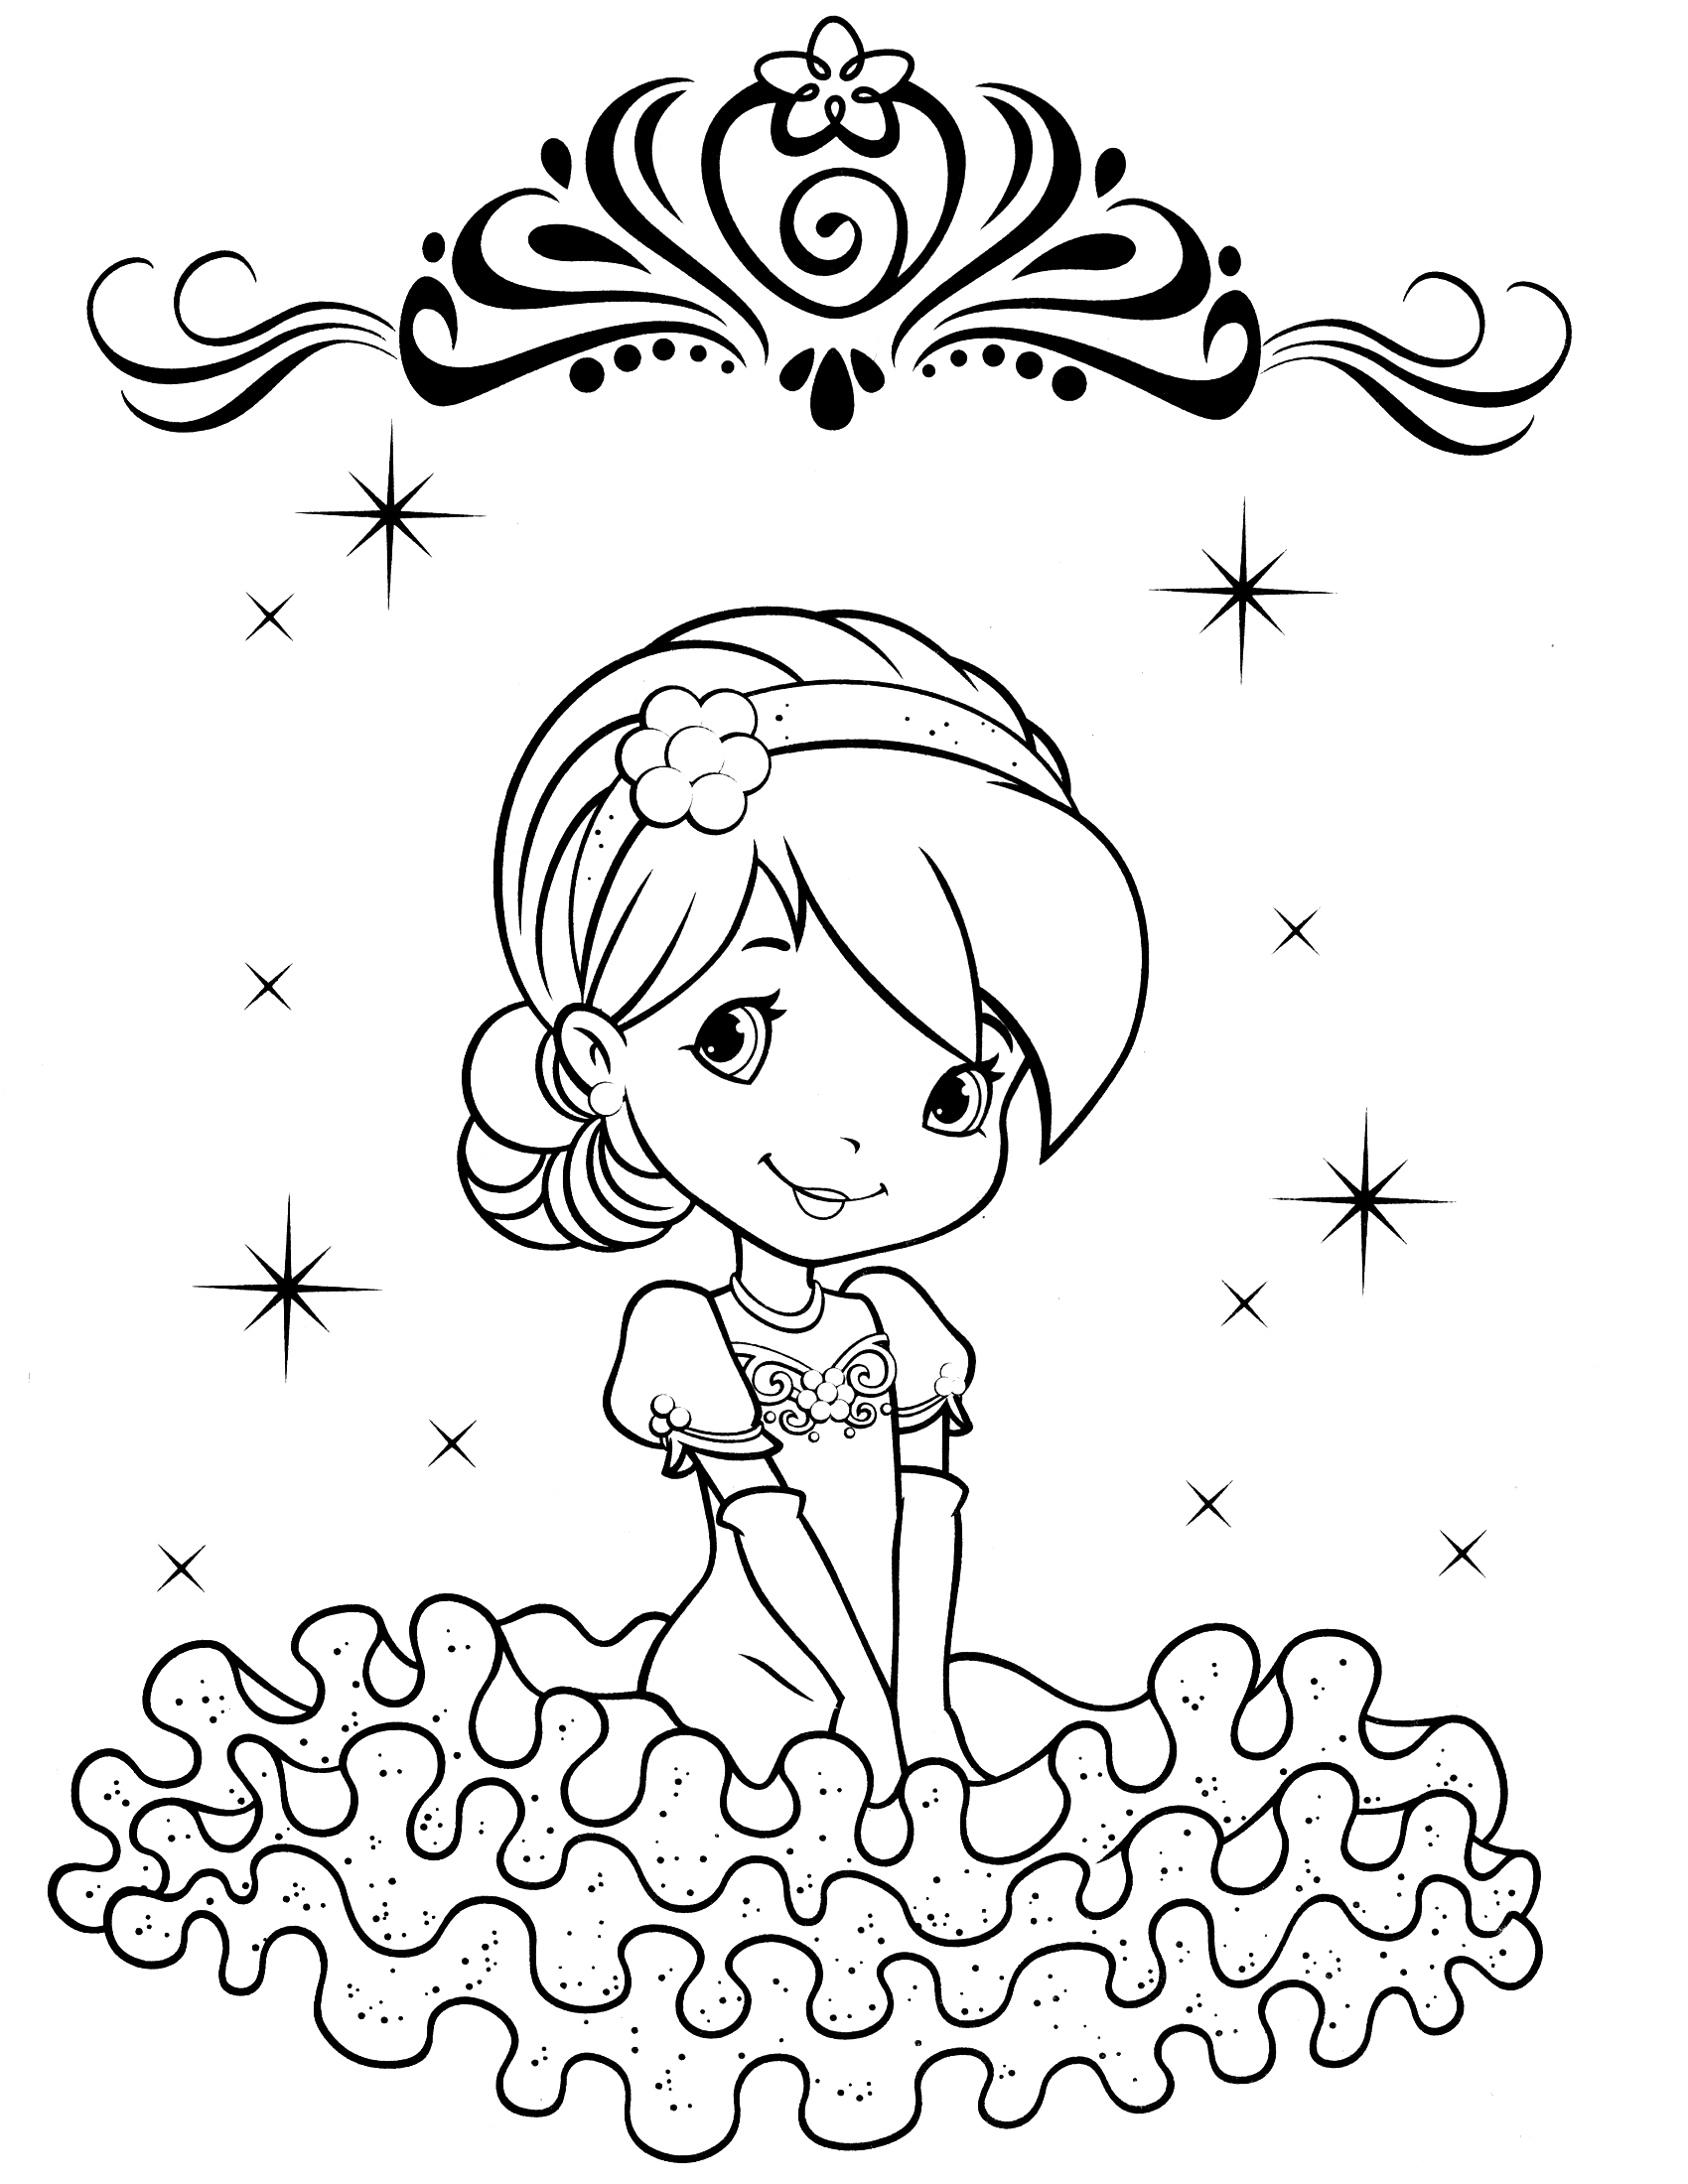  Strawberry Shortcake Coloring Pages / Cool coloring pages / 21